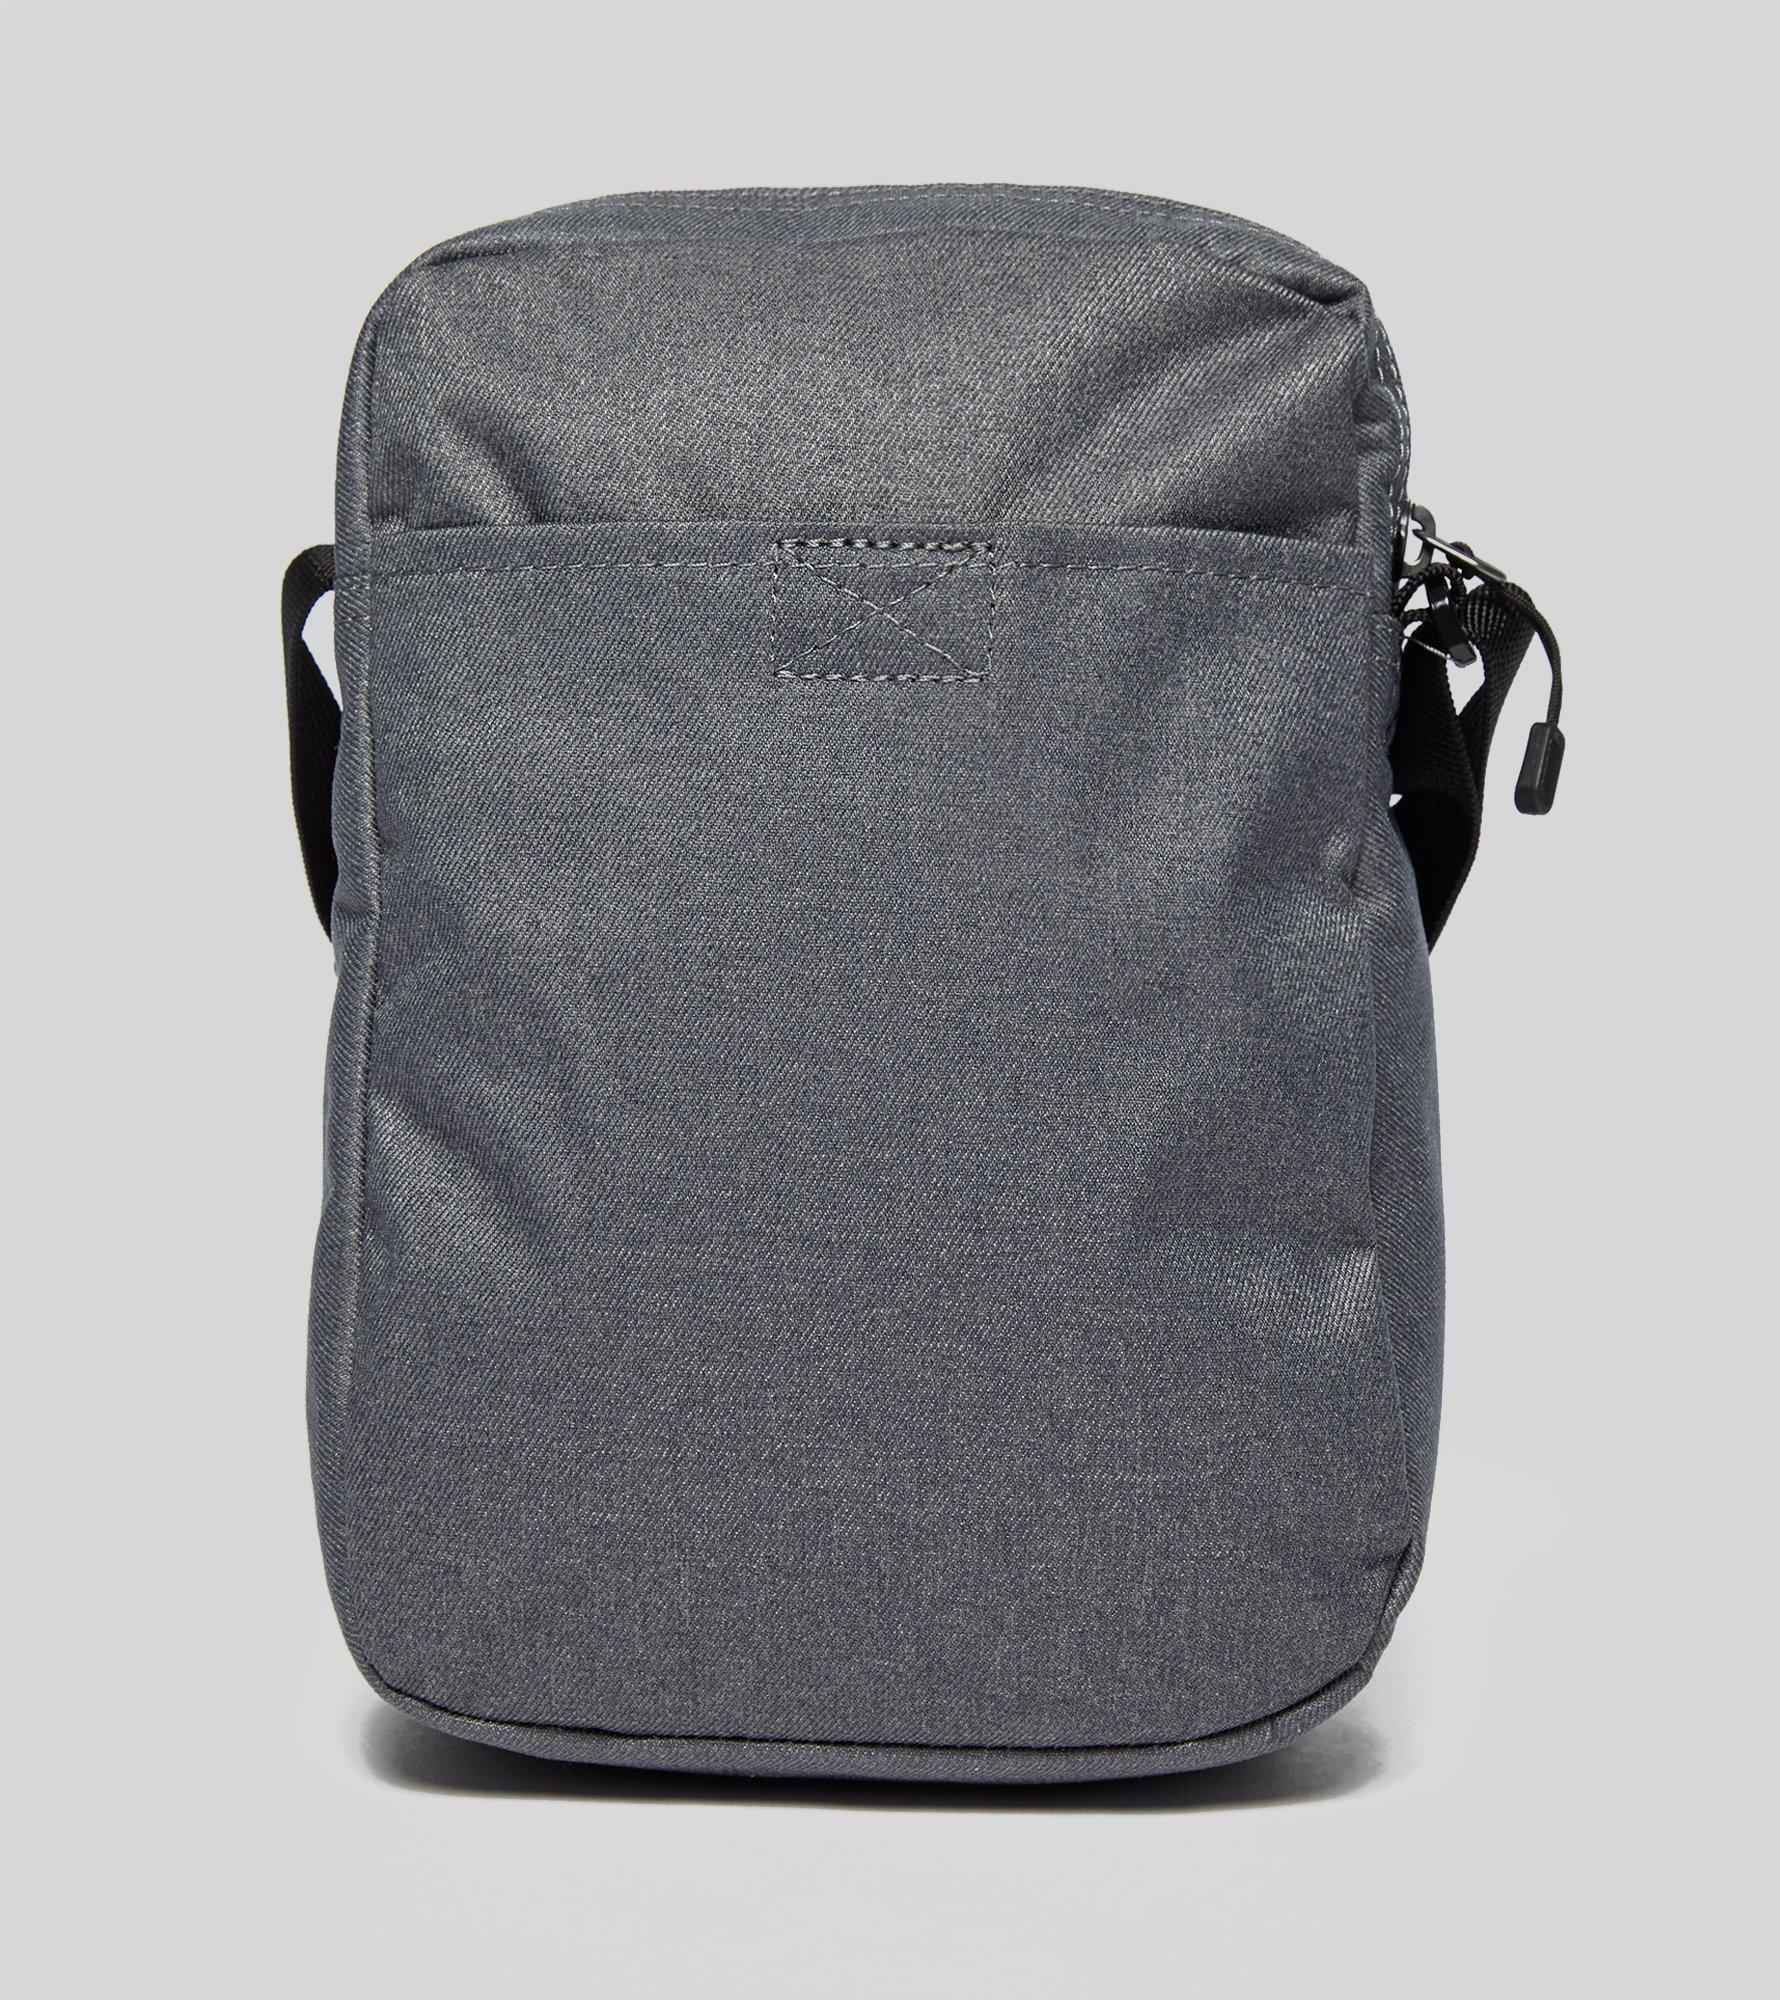 Lyst - Nike Core Small Crossbody Bag in Gray for Men